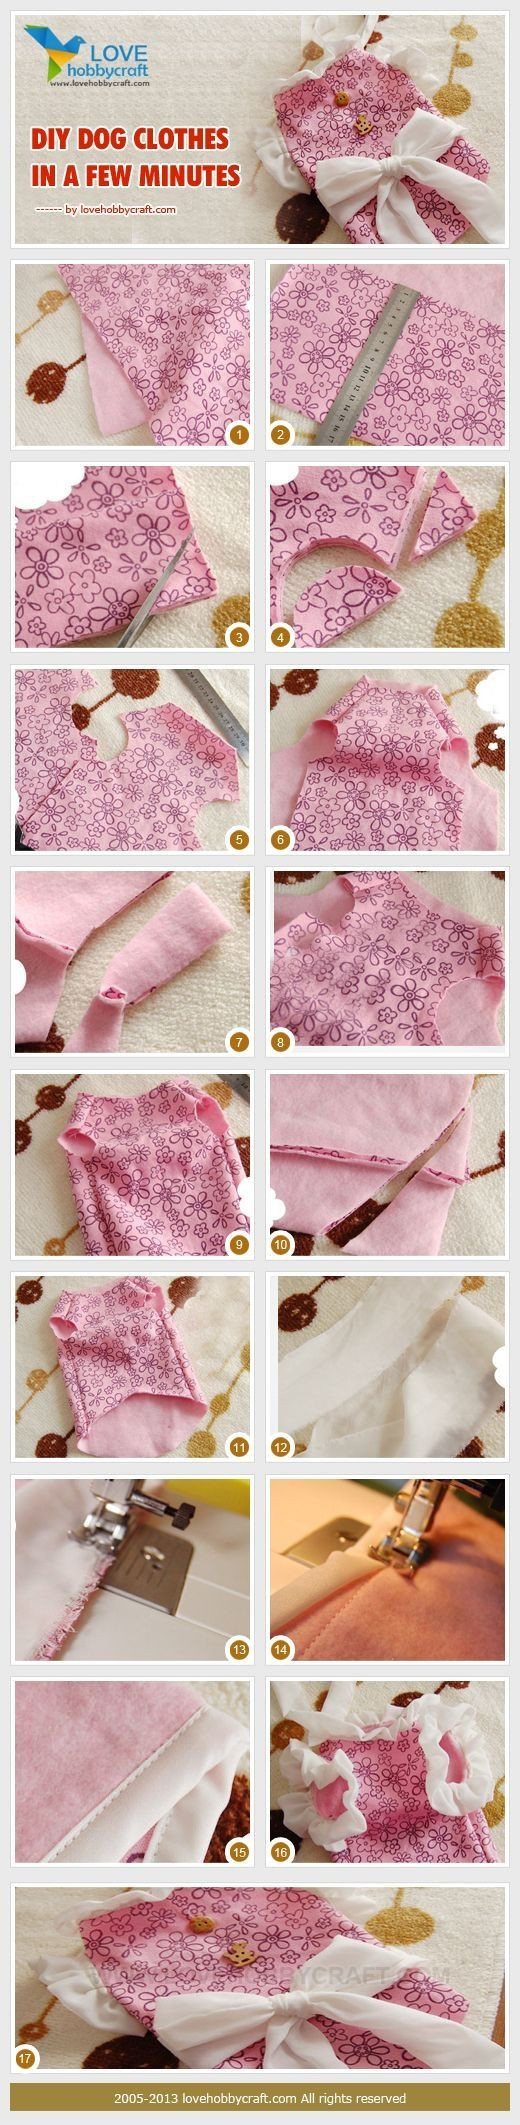 DIY Dog Clothes From Baby Clothes
 DIY dog clothes in a few minutes